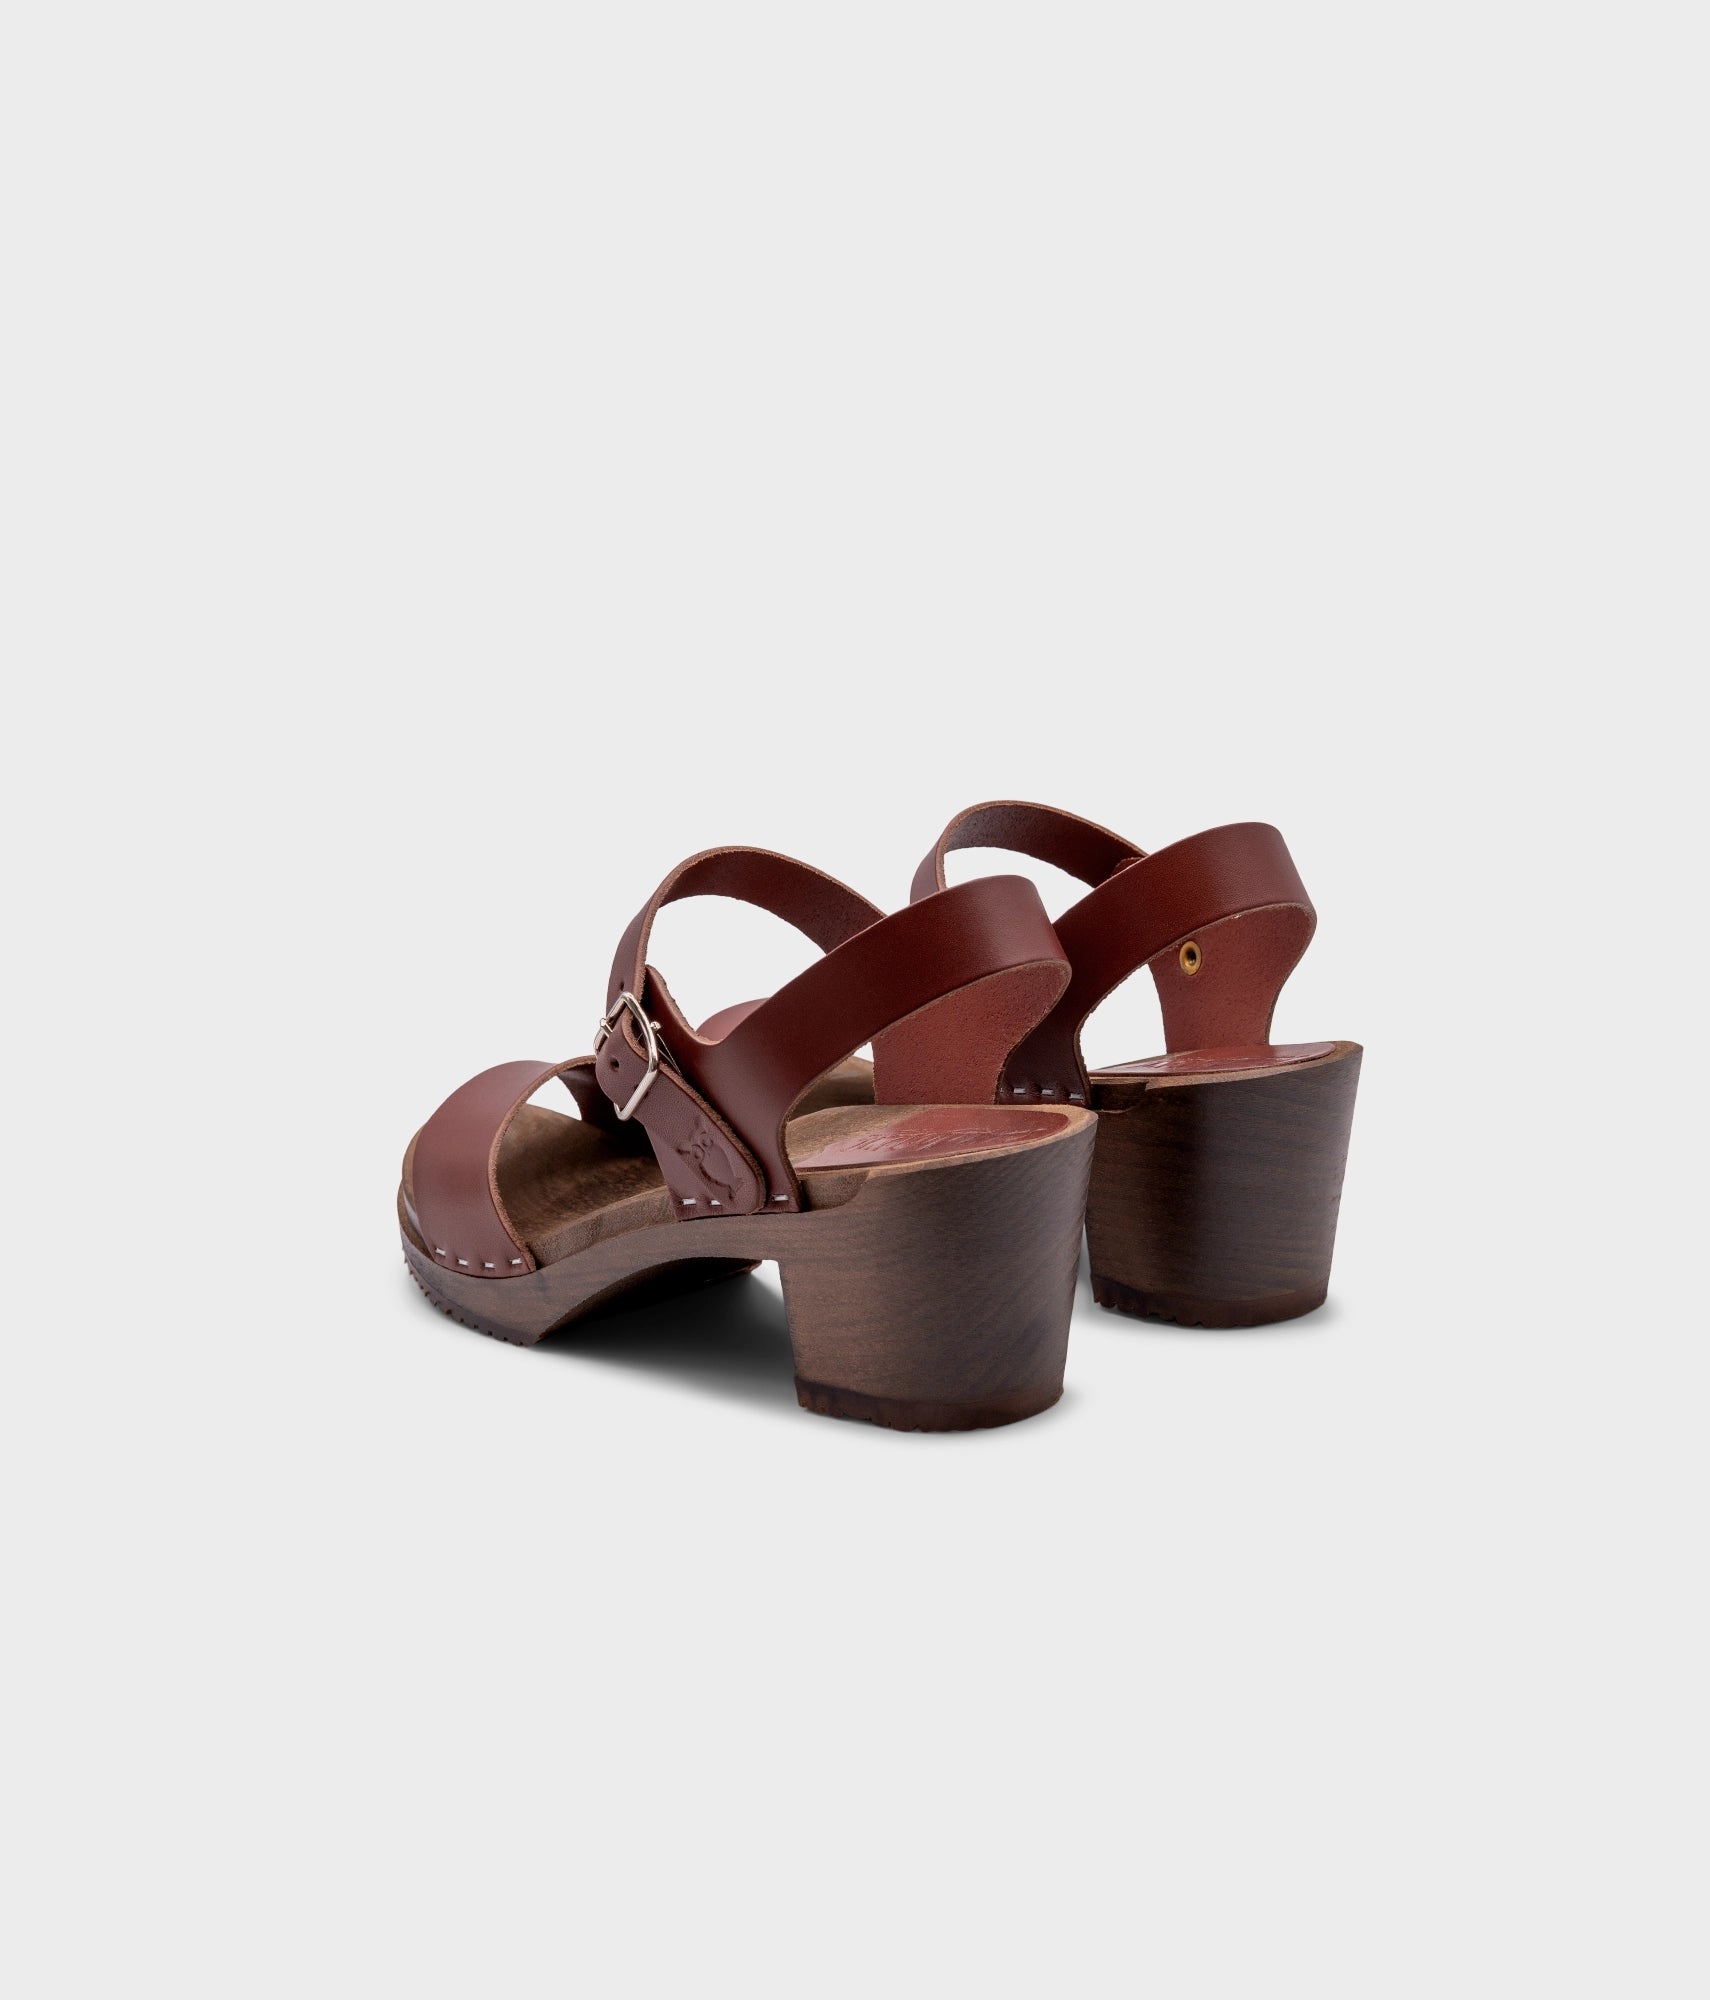 high-heeled open-toe clog sandal in cognac red vegetable tanned leather stapled on a dark wooden base